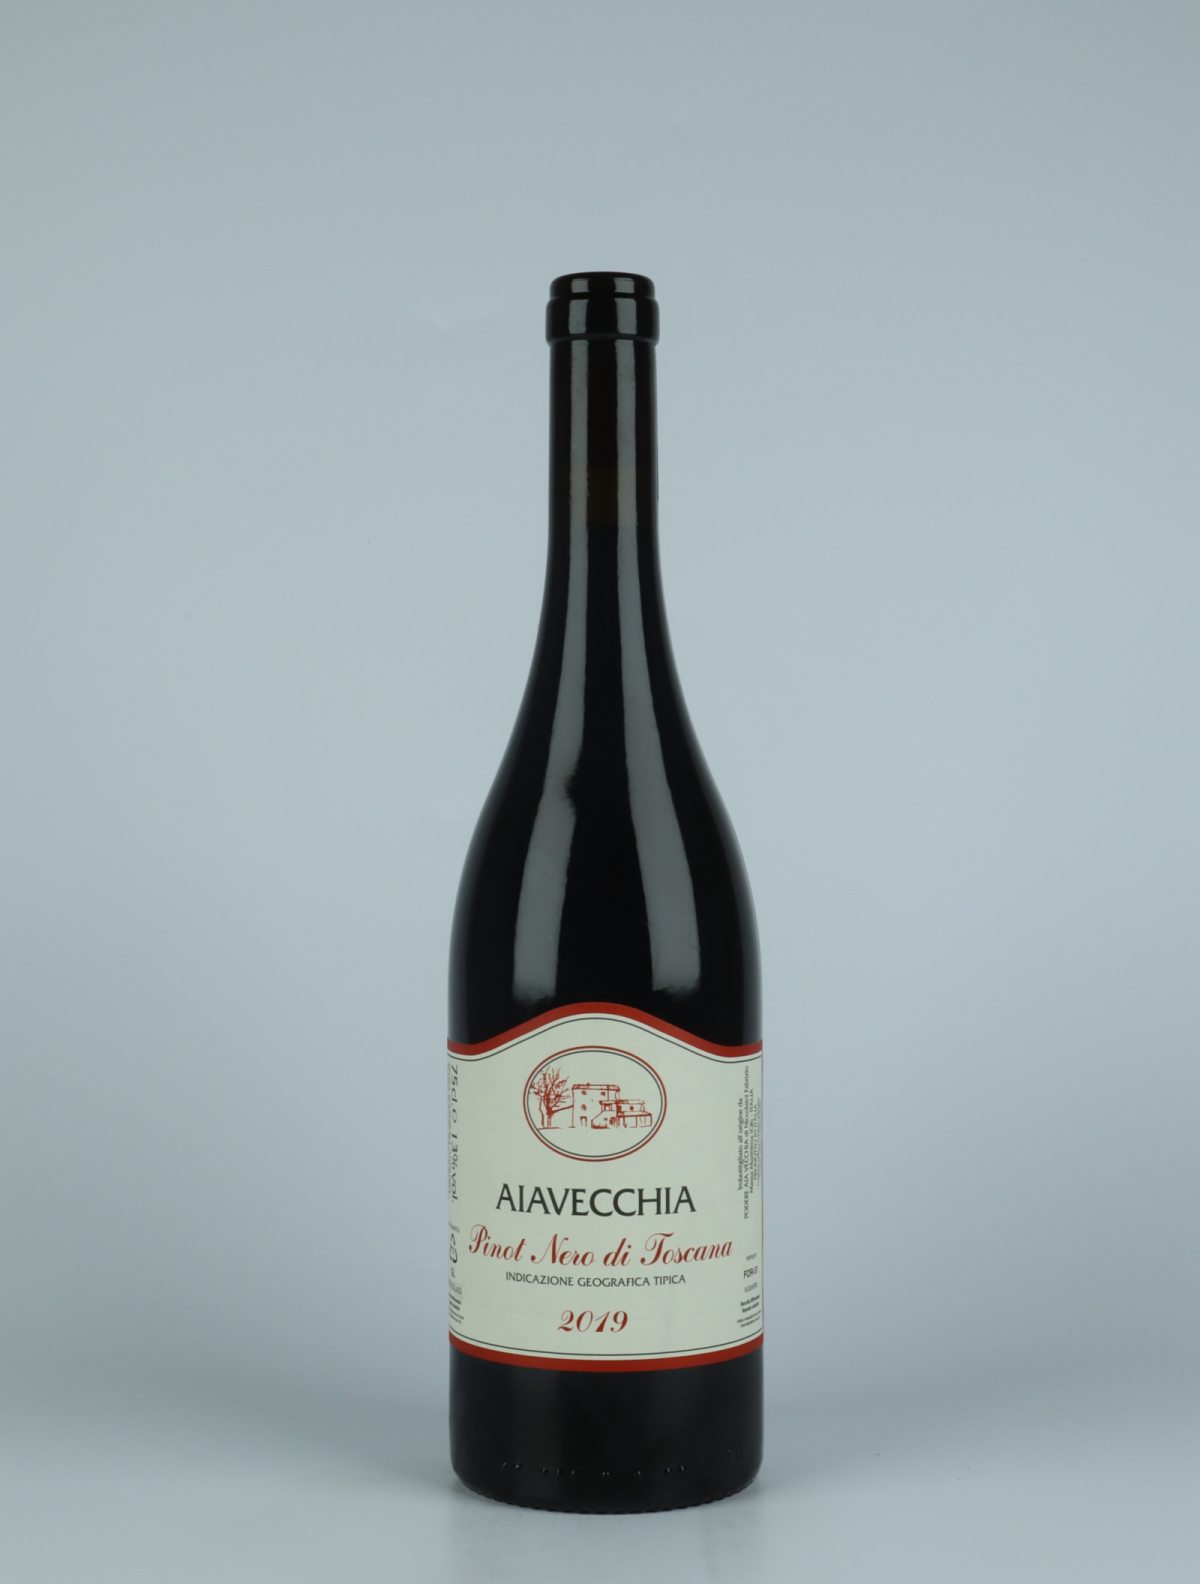 A bottle 2019 Pinot Nero Red wine from Aia Vecchia, Tuscany in Italy